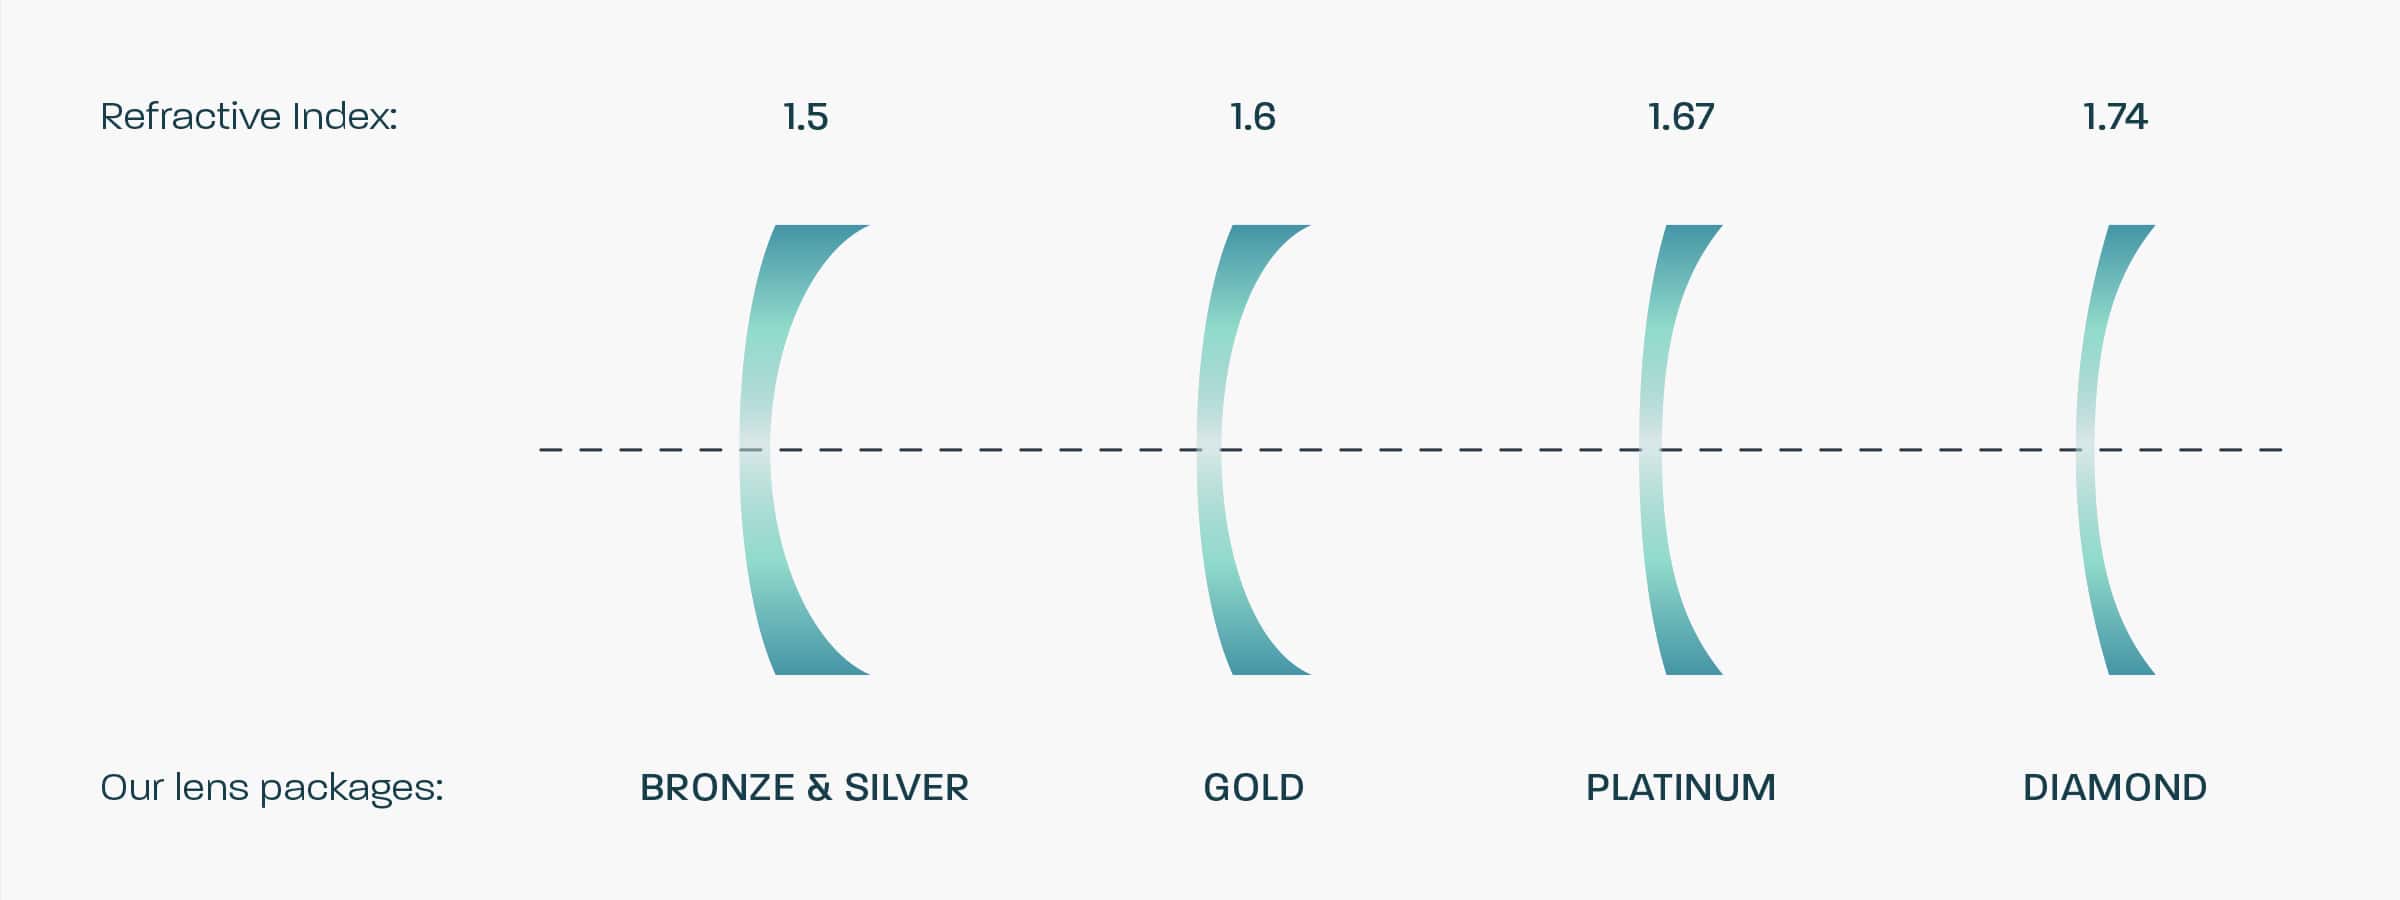 A graphic showing the refractive index for each of our lens packages. Bronze & Silver - 1.5 | Gold - 1.6 | Platinum - 1.67 | Diamond - 1.74